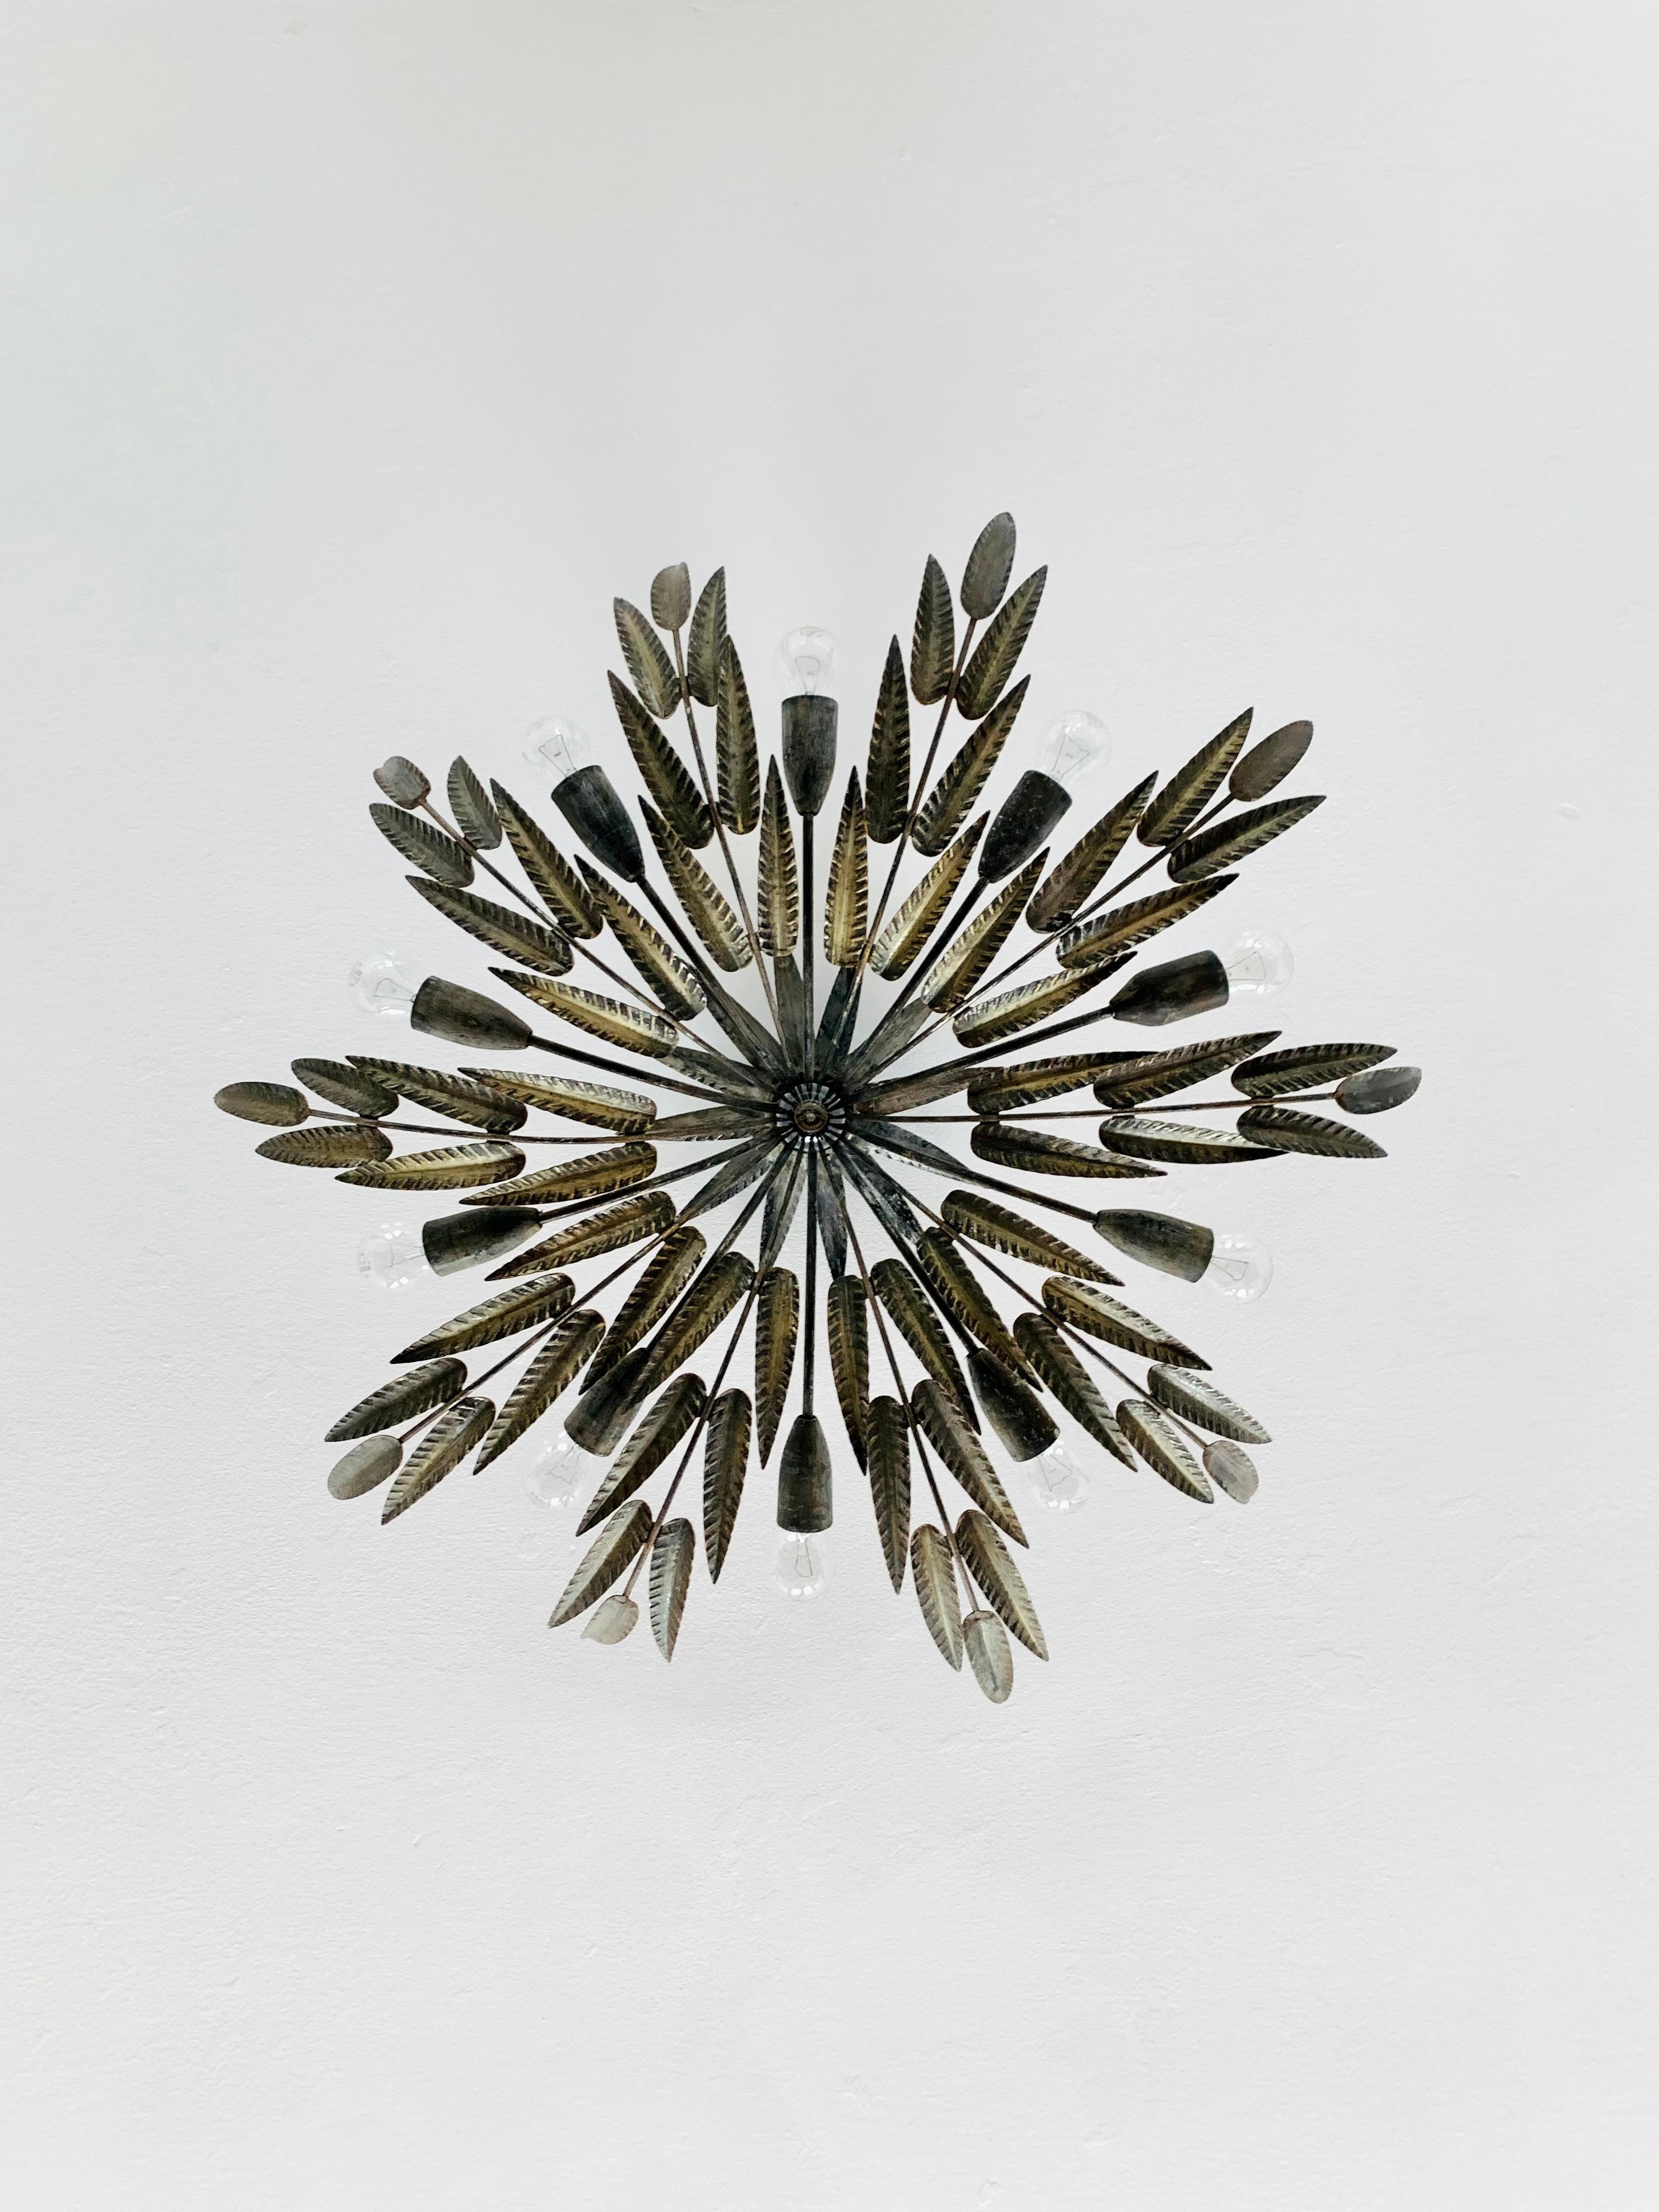 Exceptionally decorative brutalist ceiling lamp from the 1970s.
Great design and high-quality workmanship.
The leaves create a great, very noble light.

Condition:

Very good vintage condition with slight signs of wear consistent with